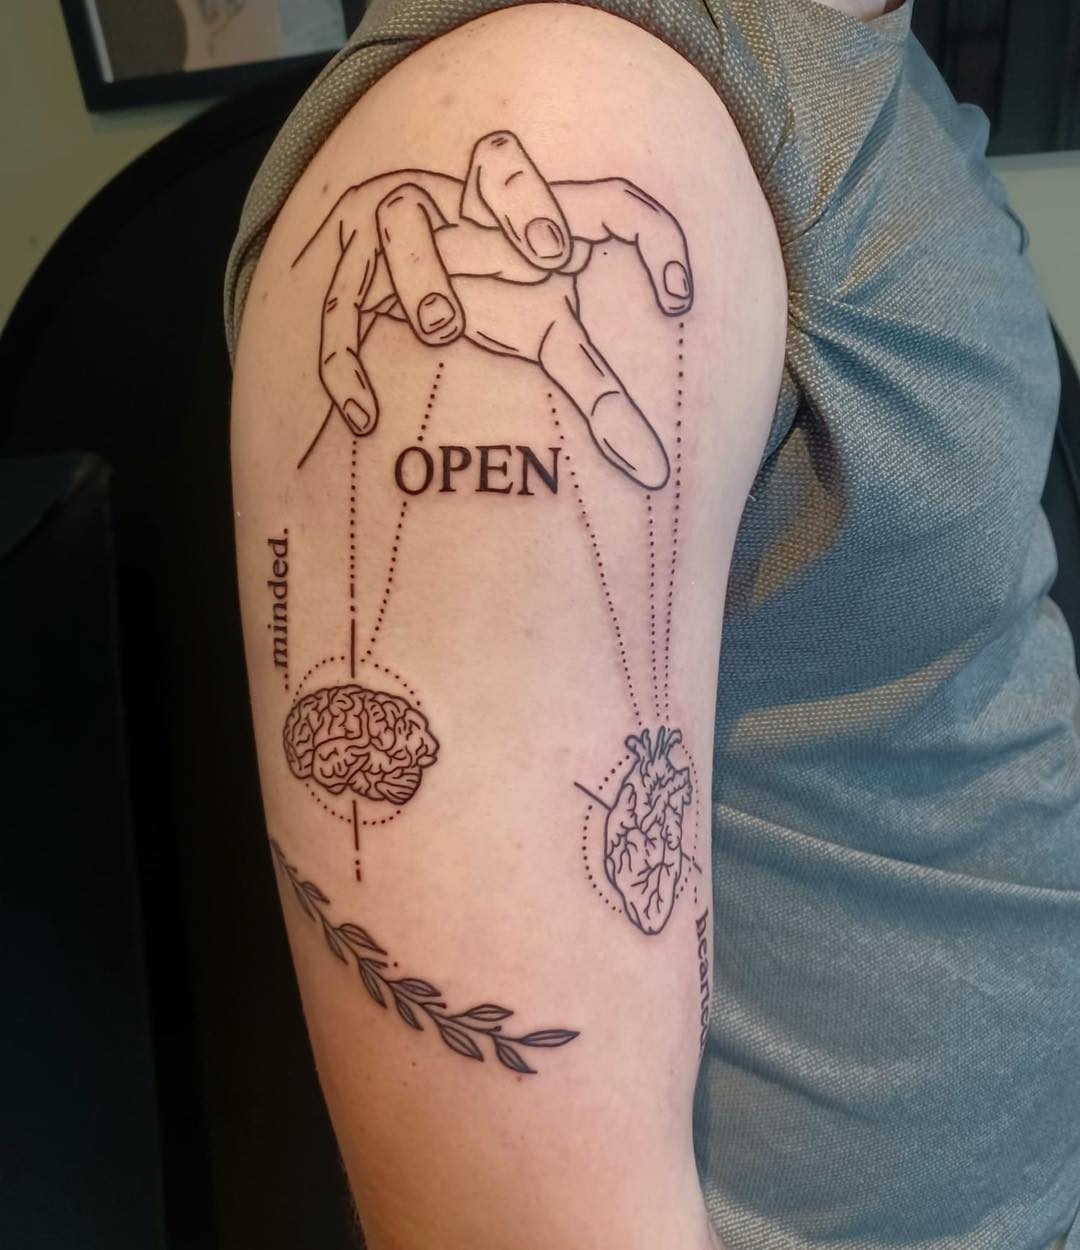 Open minded - linework